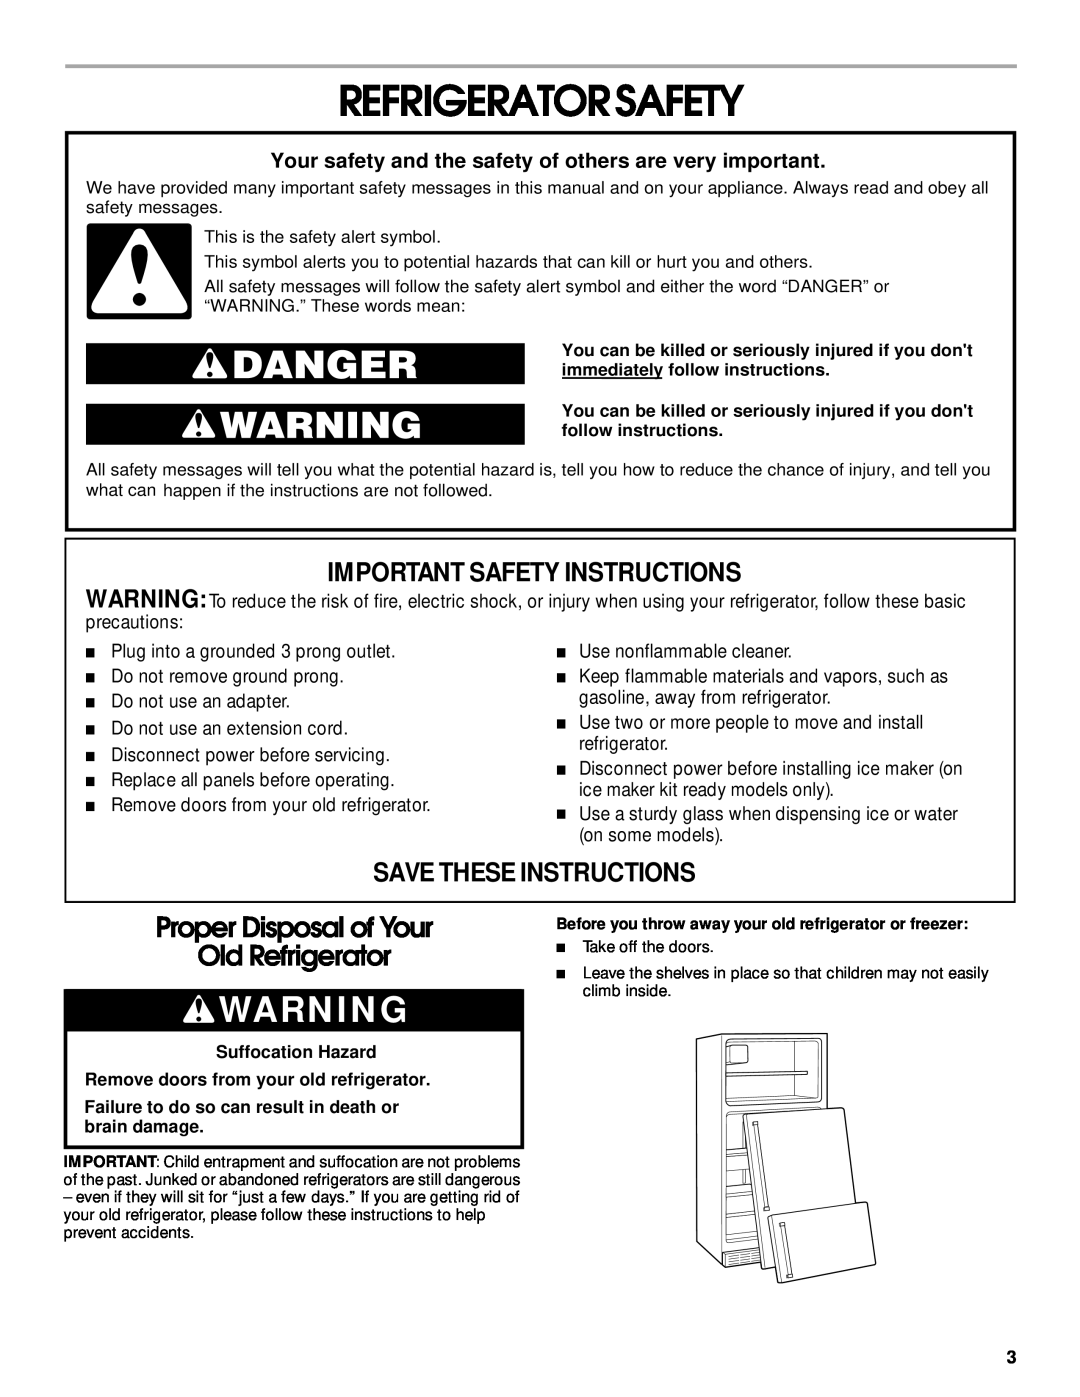 Whirlpool ST14CKXHW00 manual Refrigeratorsafety, Important Safety Instructions, Save These Instructions 